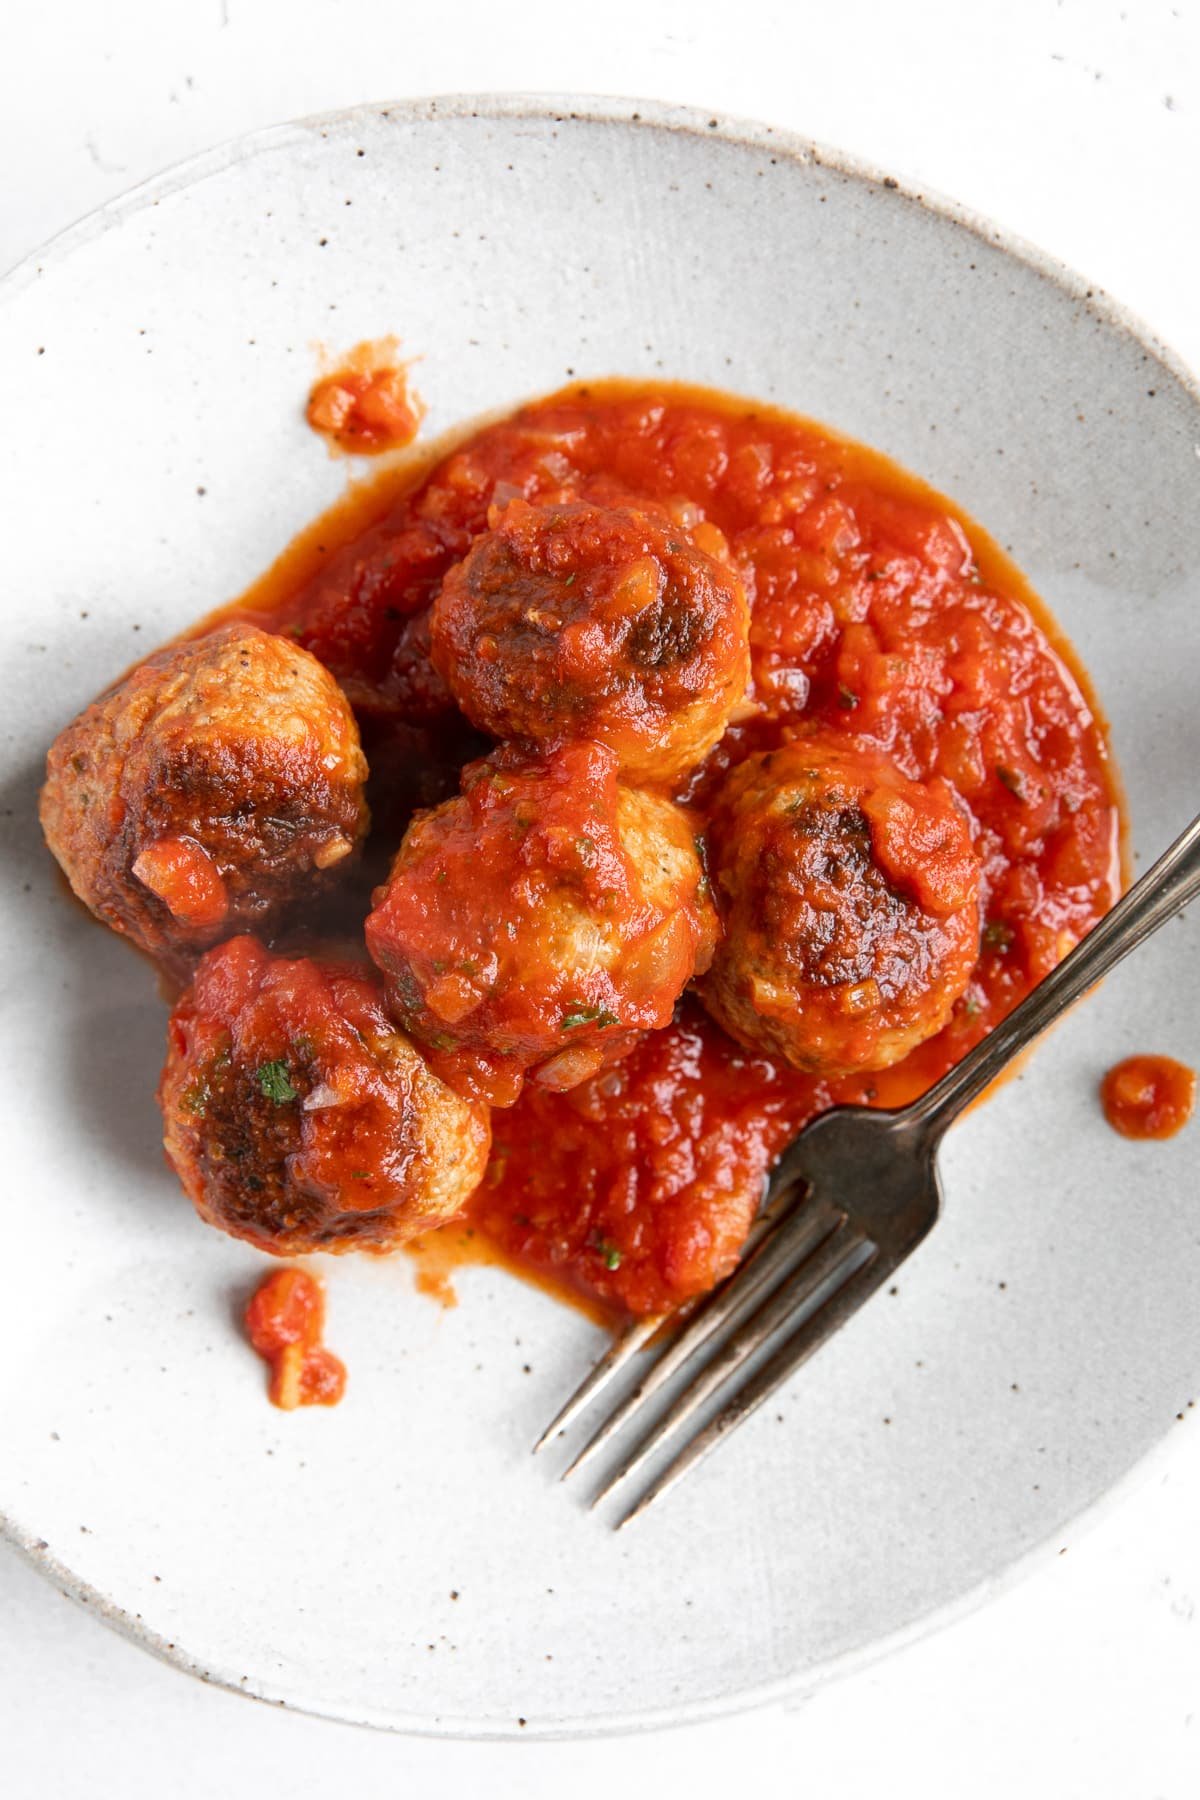 Small white serving plate filled with six homemade beef meatballs covered in tomato sauce.